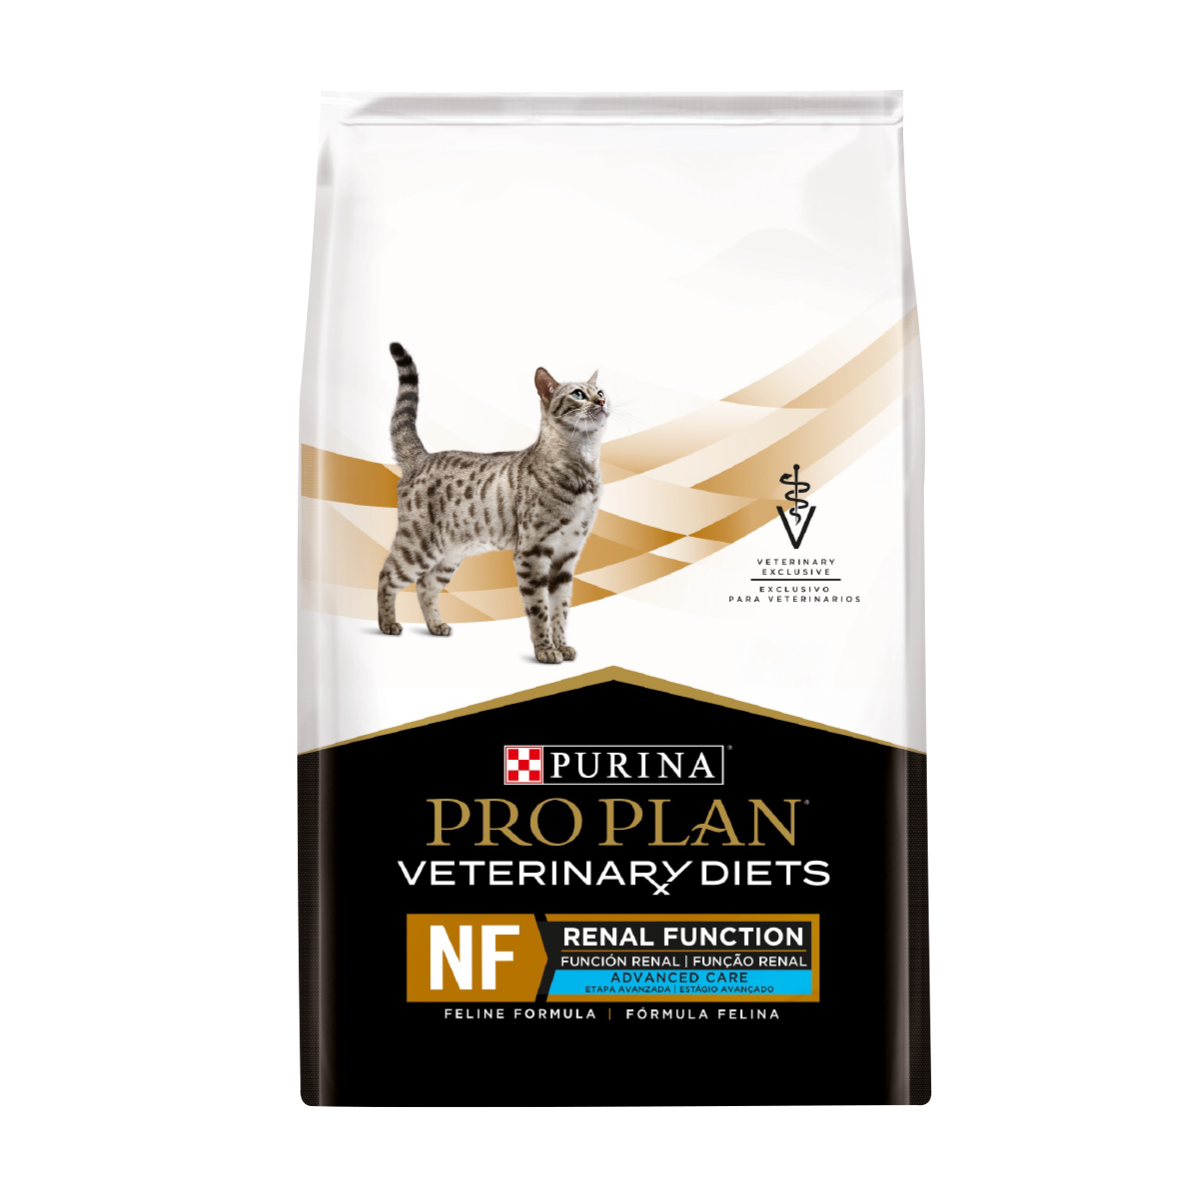 purina-pro-plan-veterinay-diets-cat-nf-renal-function-advanced-care.png